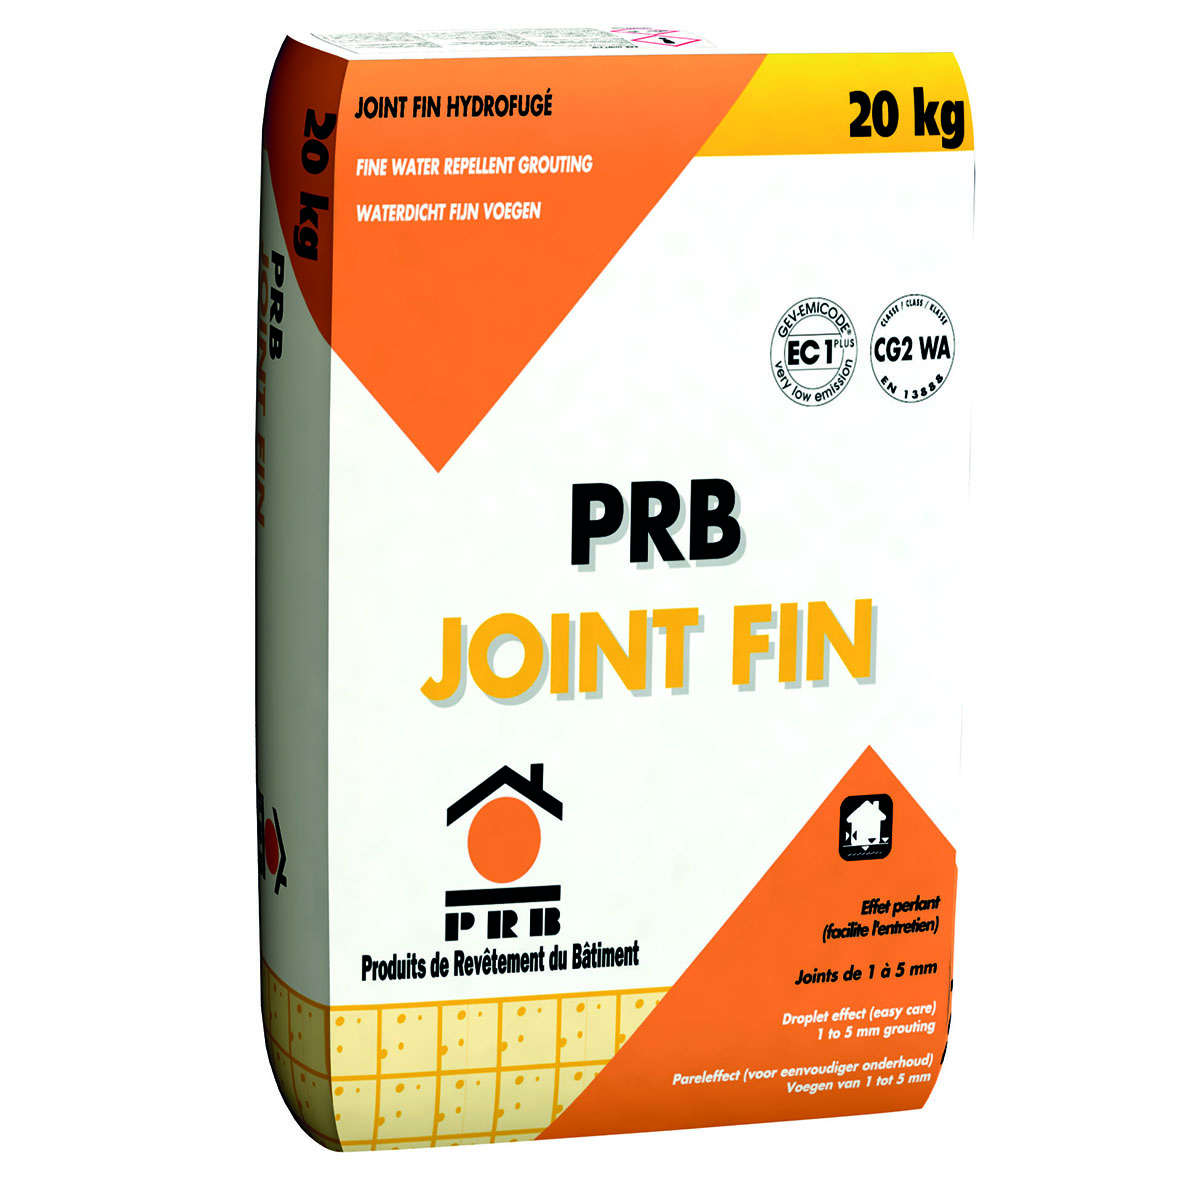 joint-fin-carrelage-prb-0